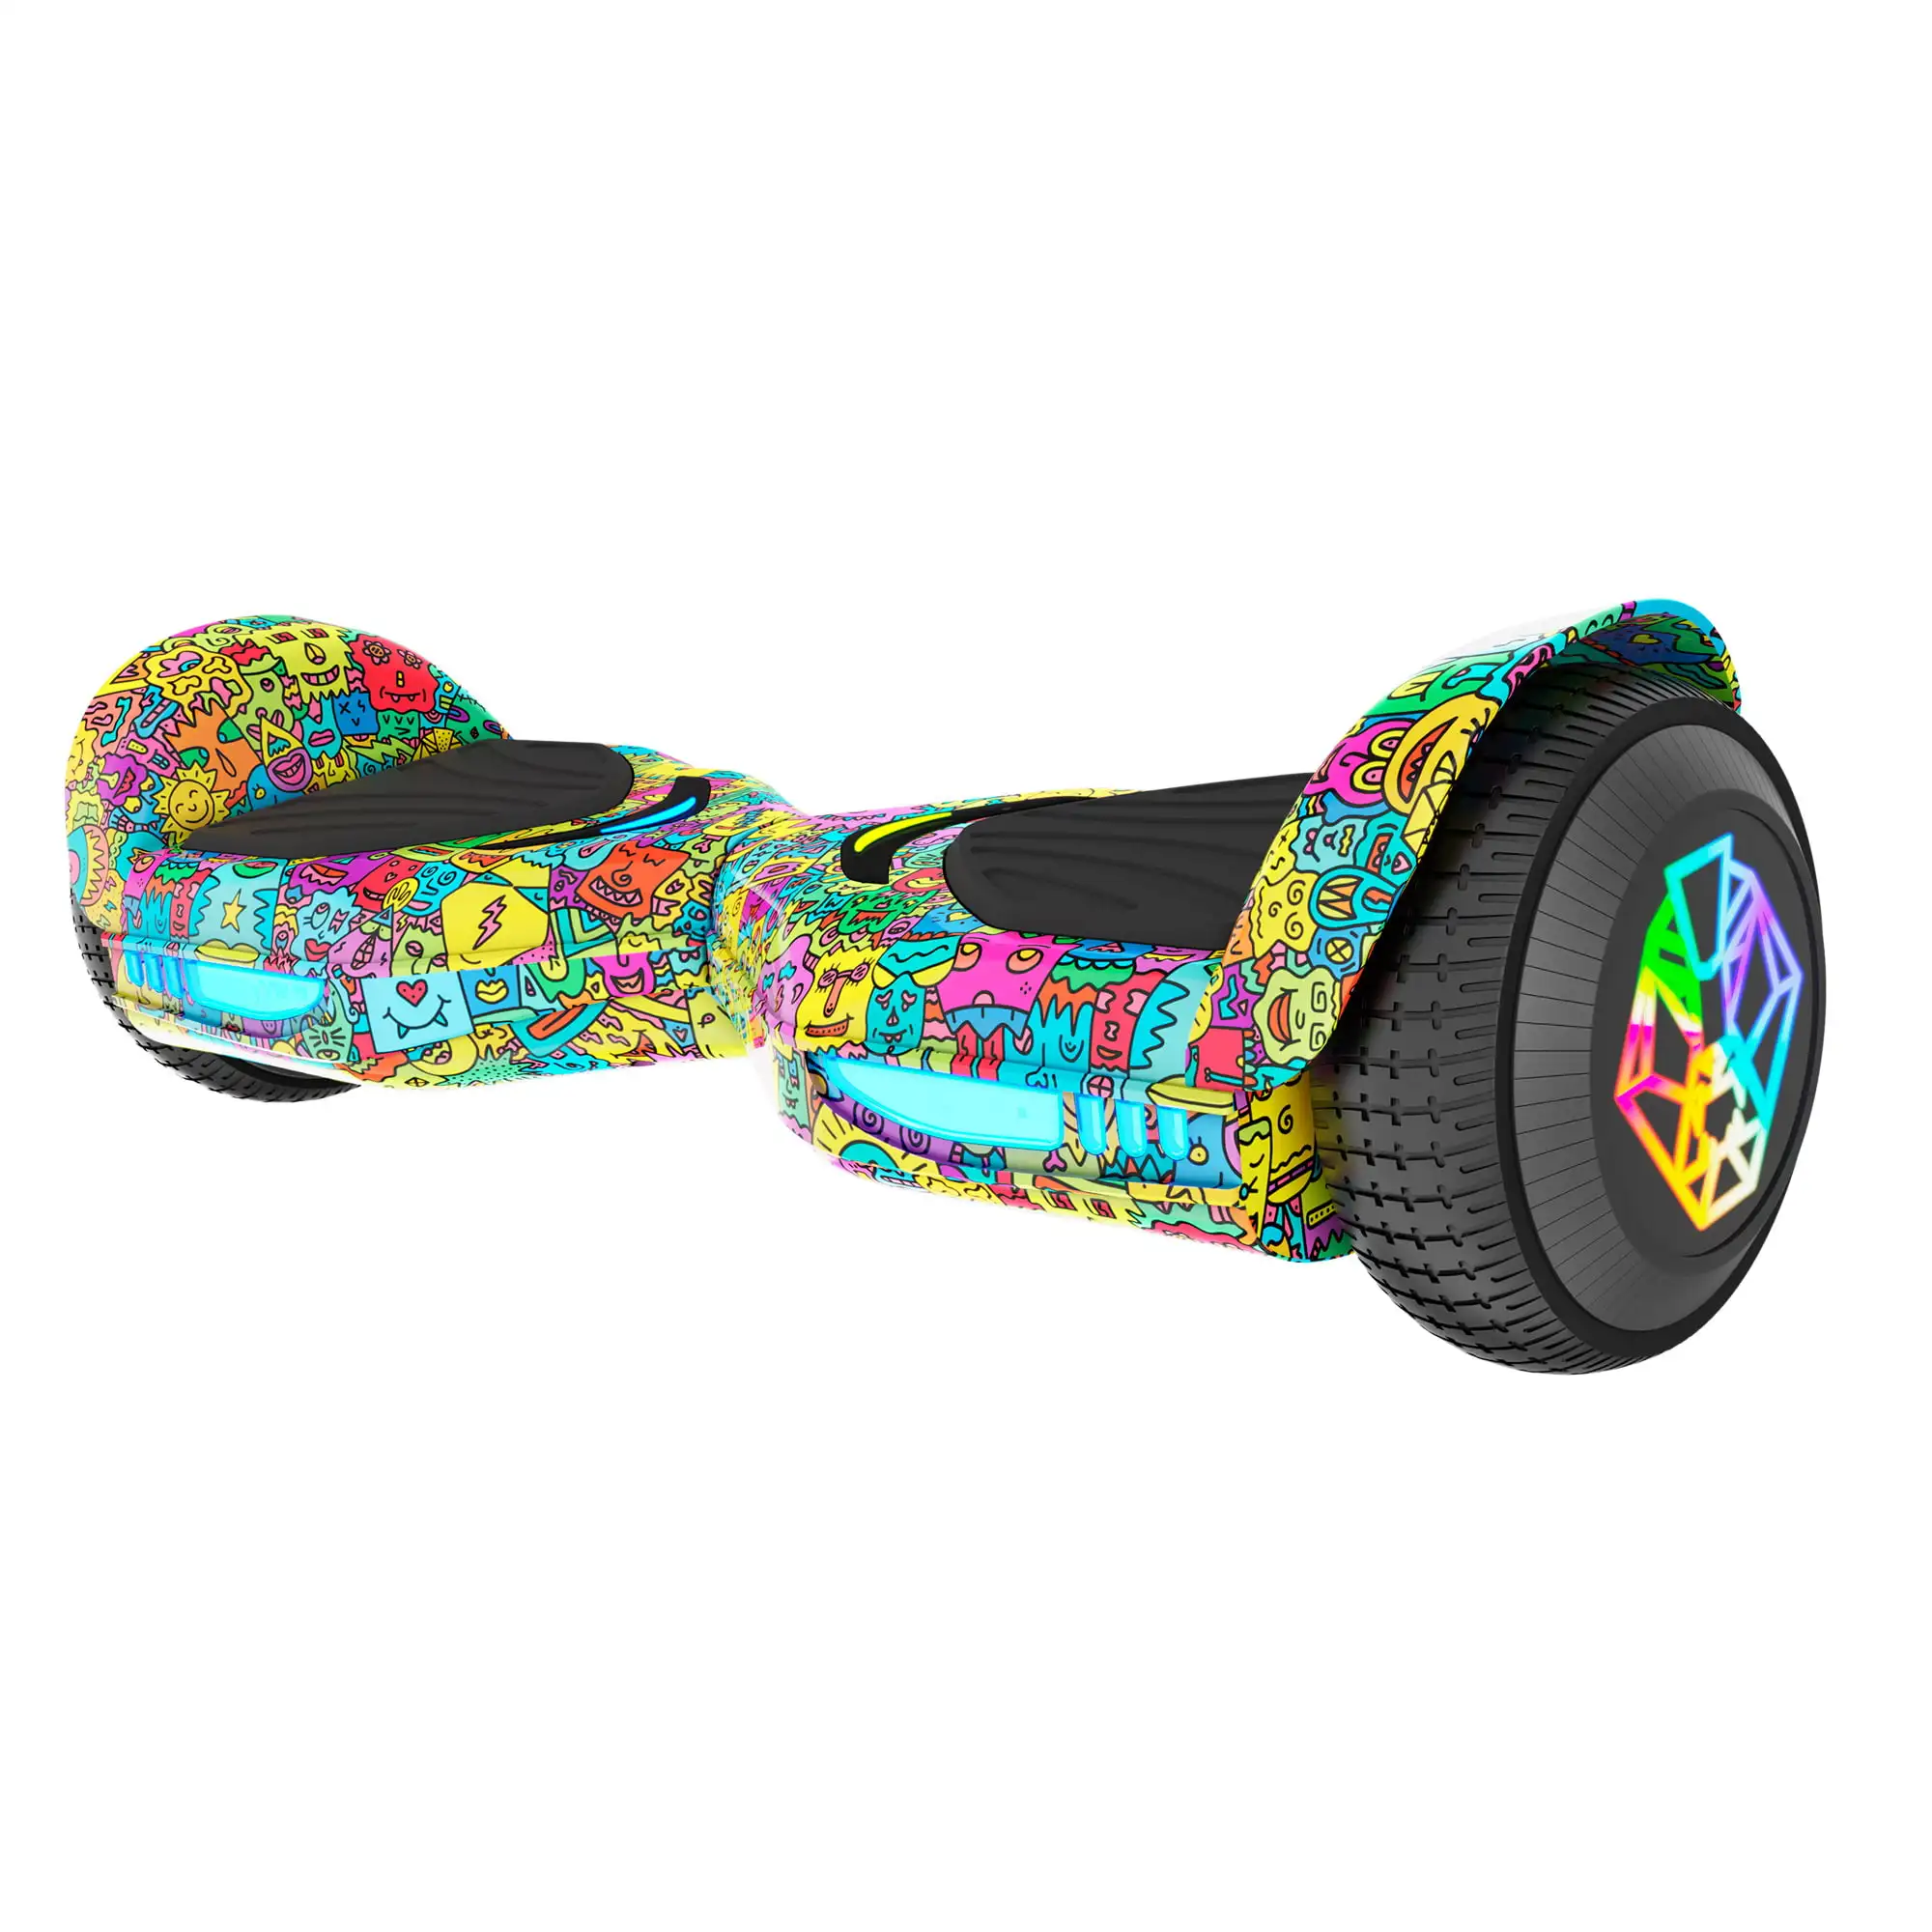 

Multicolor SwagBOARD EVO Freestyle Hoverboard - Bluetooth Speaker, Light-Up Wheels, Reaching 7 MPH Max Speed